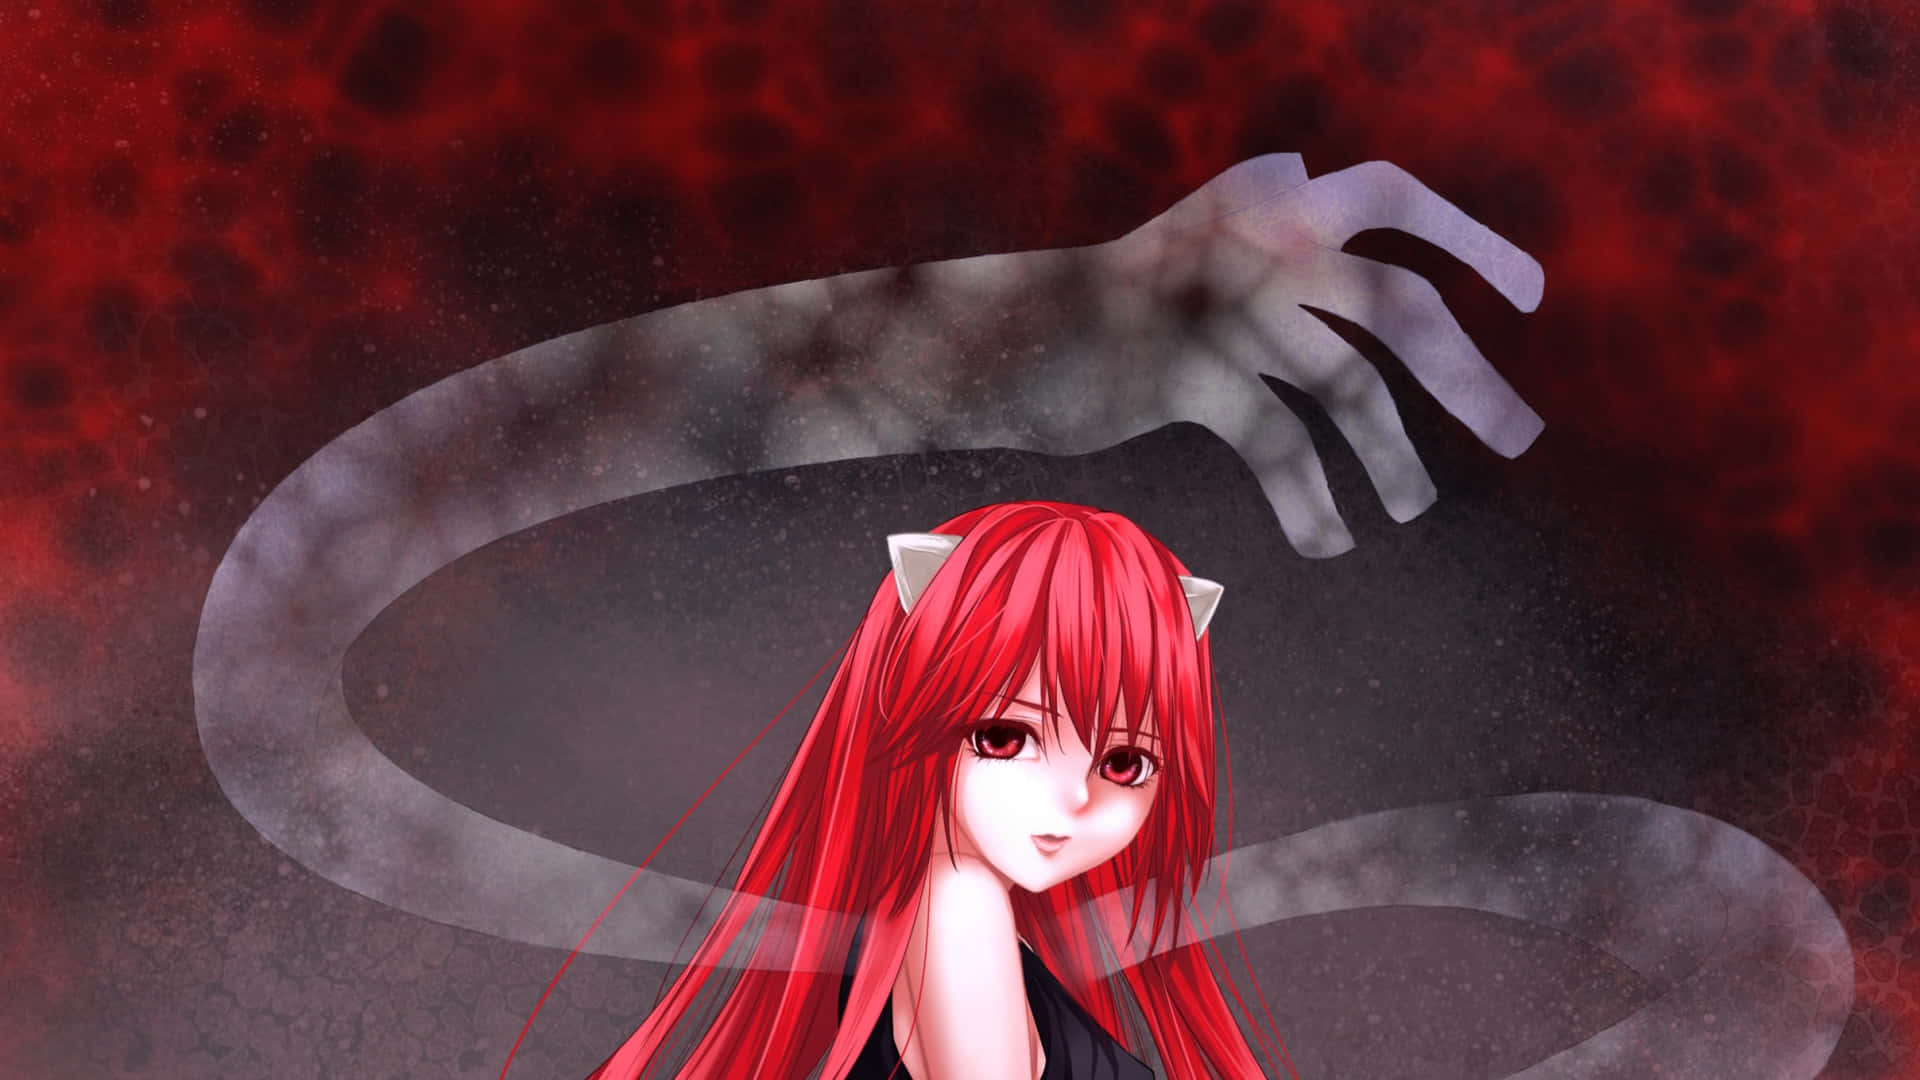 The Mysterious And Powerful Lucy From Elfen Lied Wallpaper